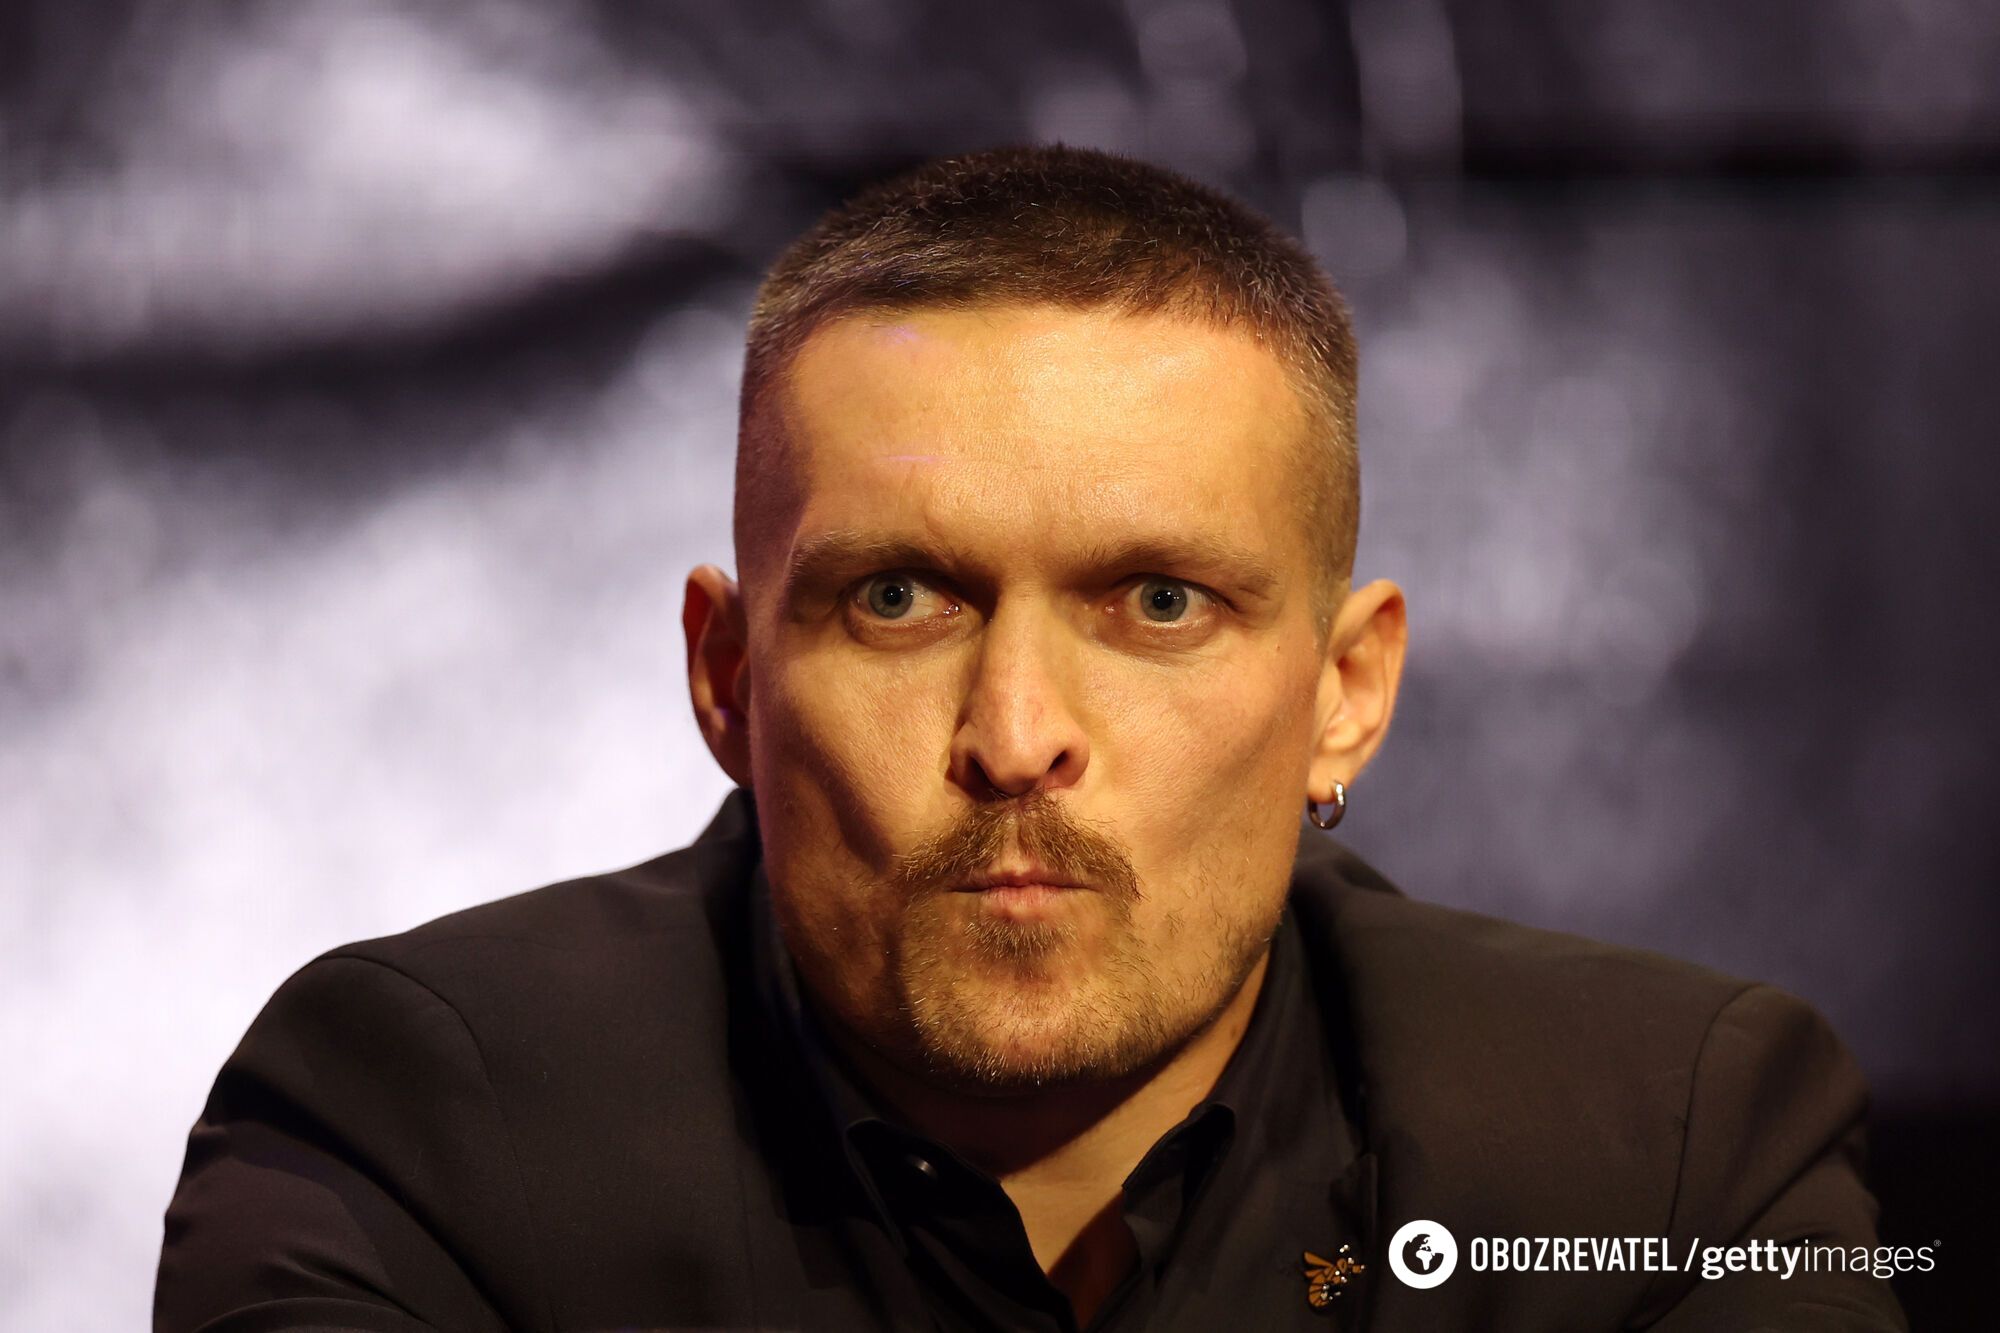 ''Doesn't want to look like a fool'': Britain suspects Fury wants to postpone fight with Usyk